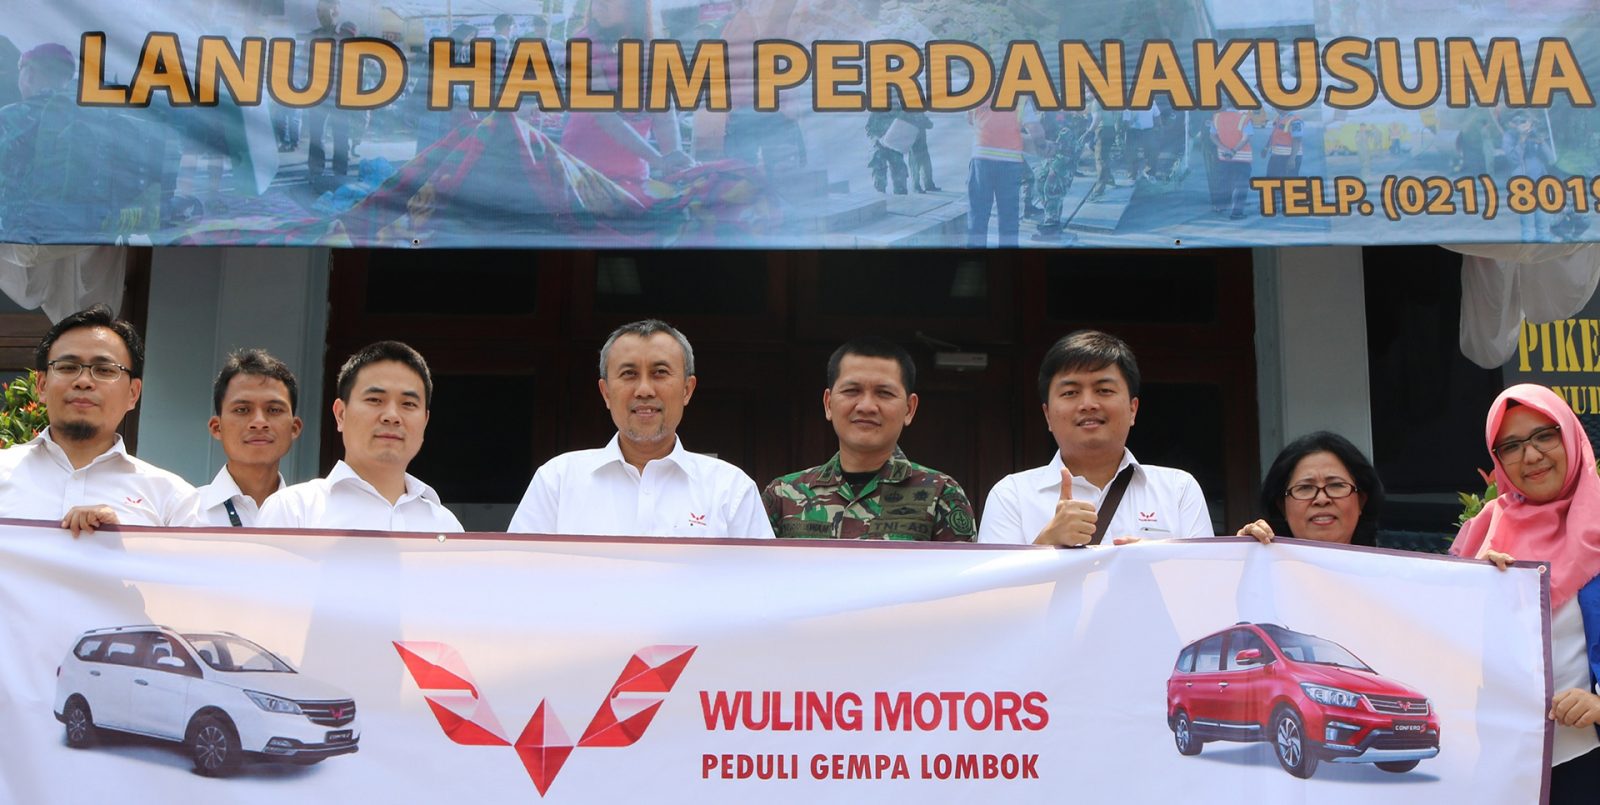 Image Wuling Motors Provides Goods For Lombok Disaster Victims